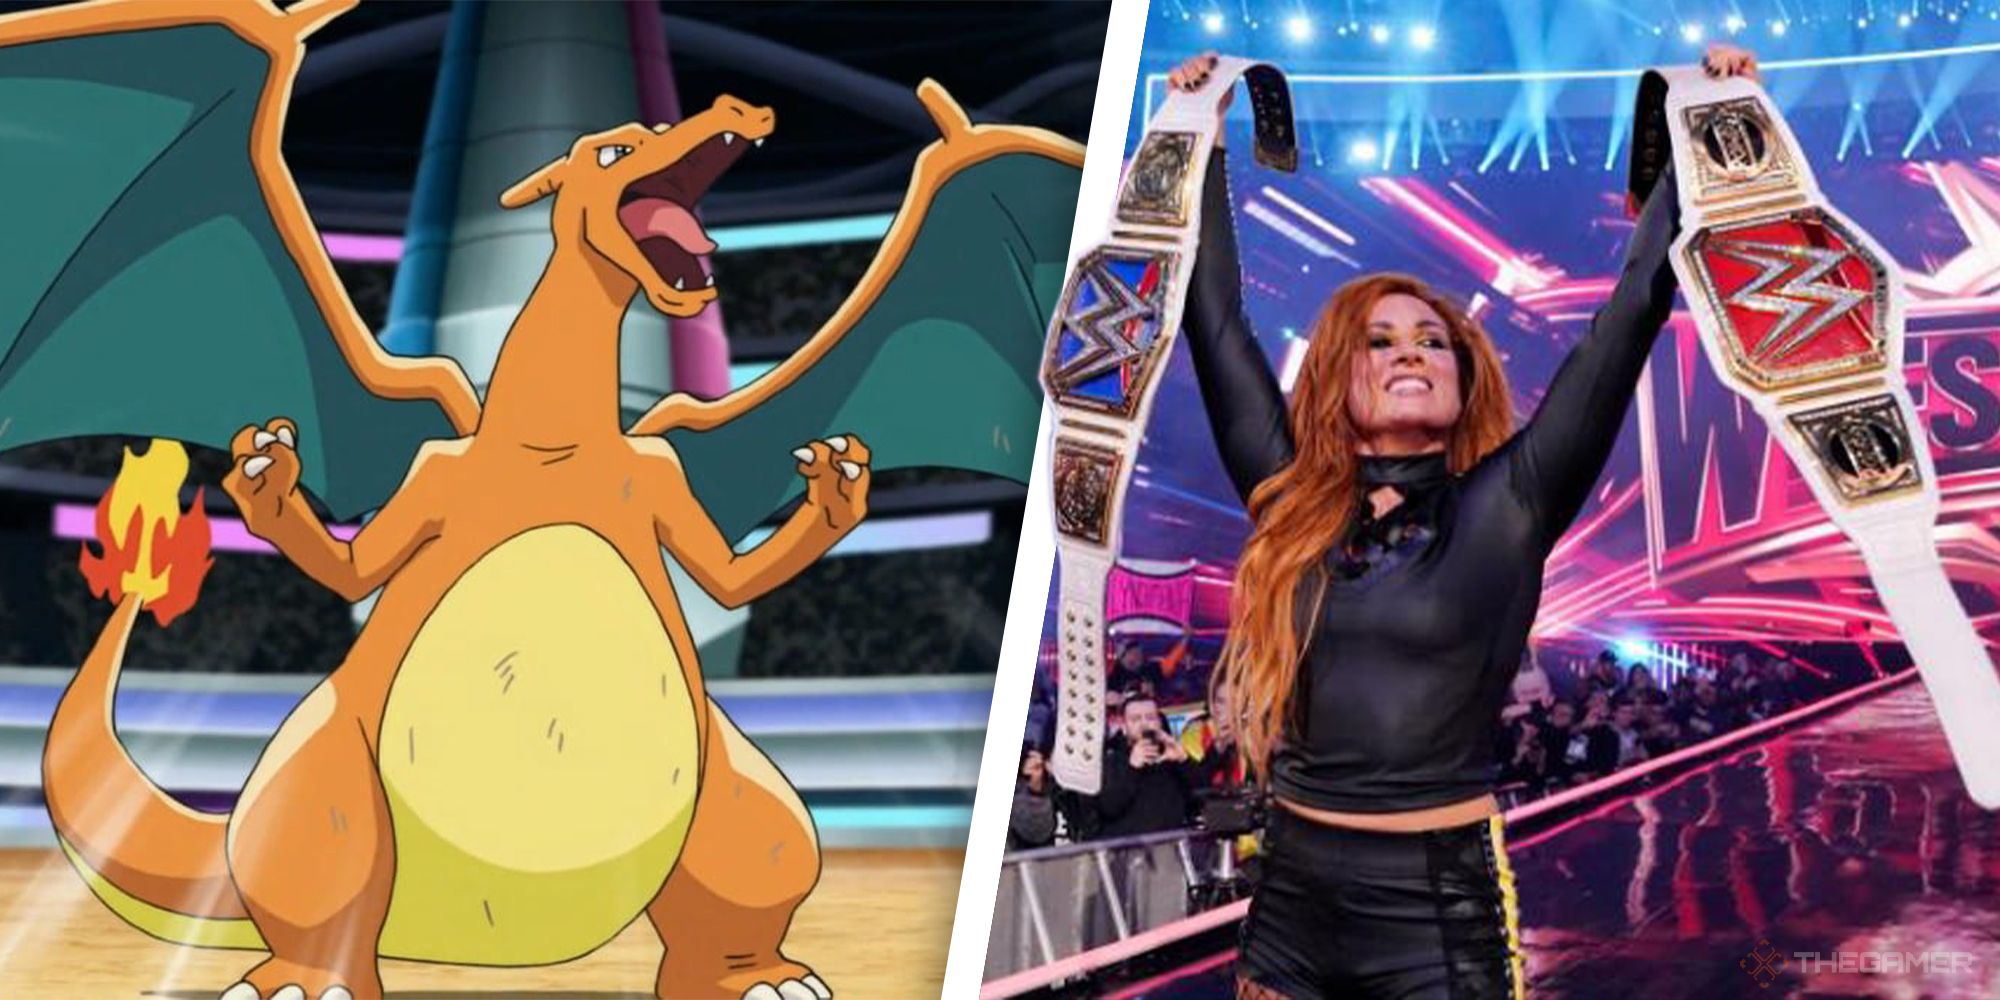 Heres 30 Wrestlers As Pokemon For The Royal Rumble (2)